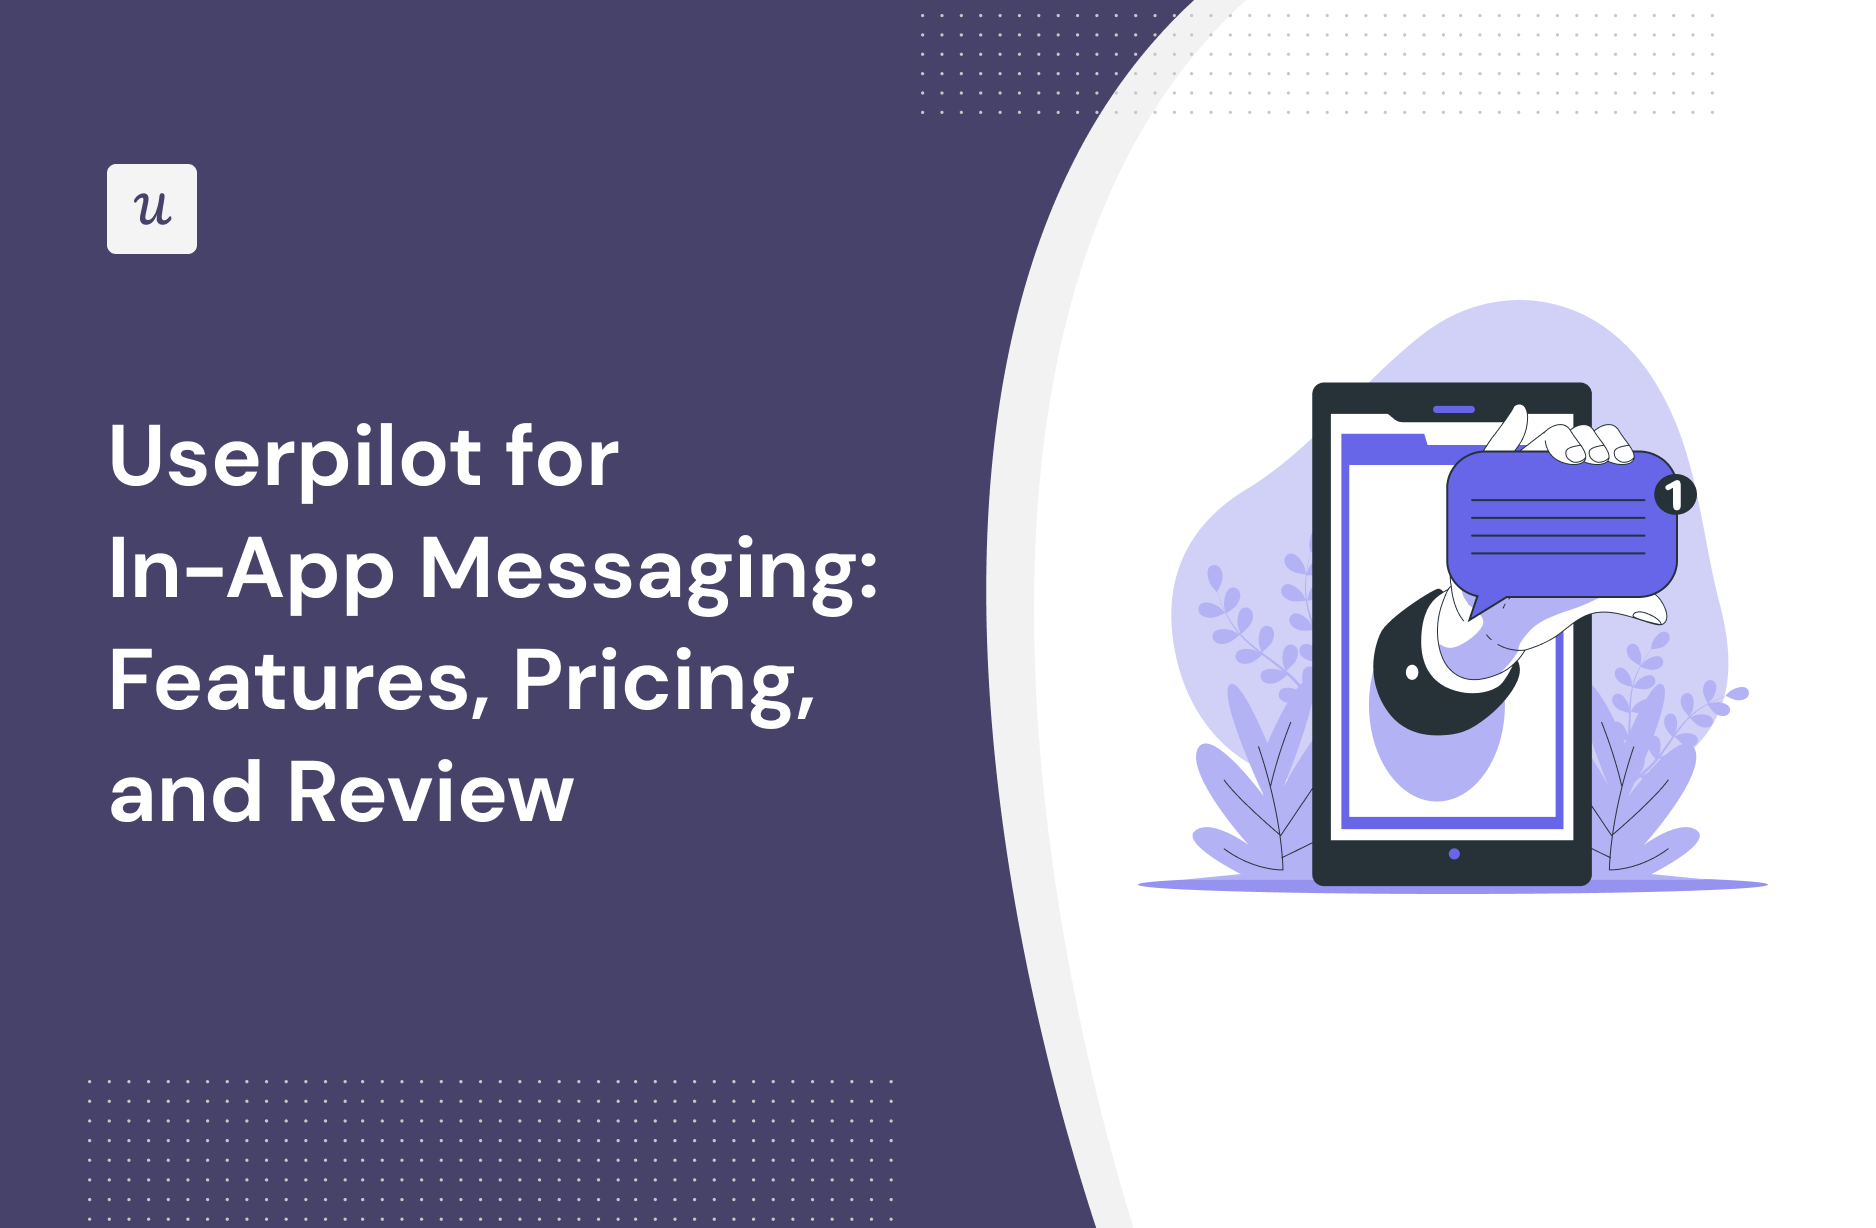 Userpilot for In-App Messaging: Features, Pricing, and Review